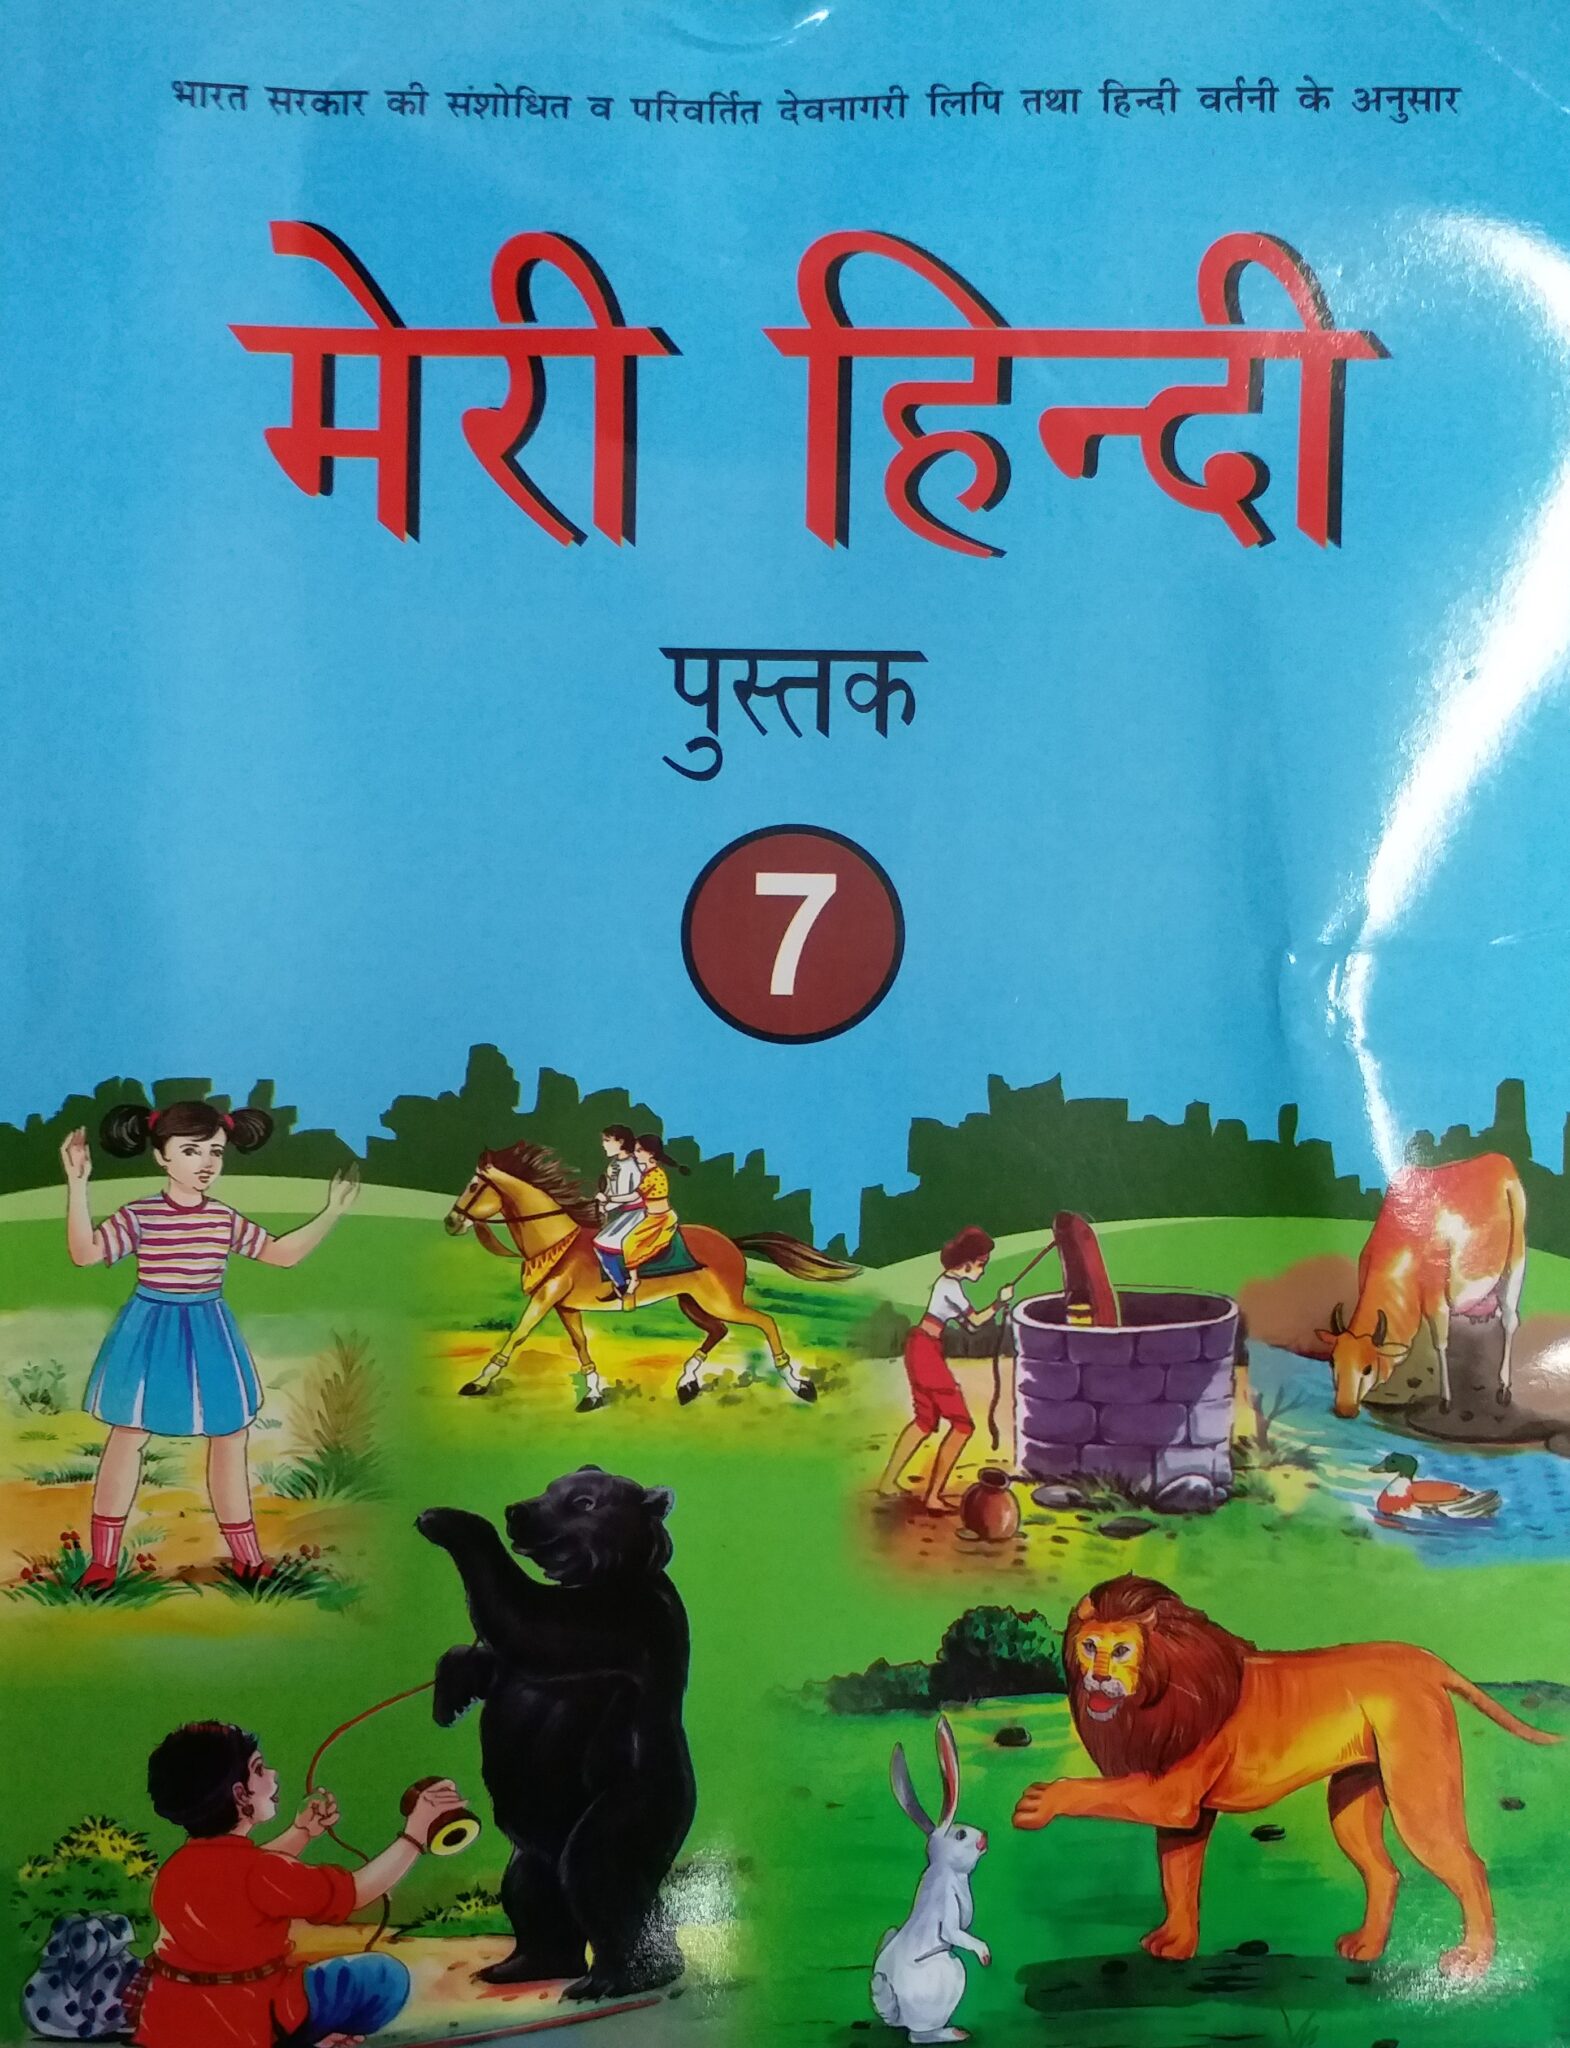 book review format in hindi